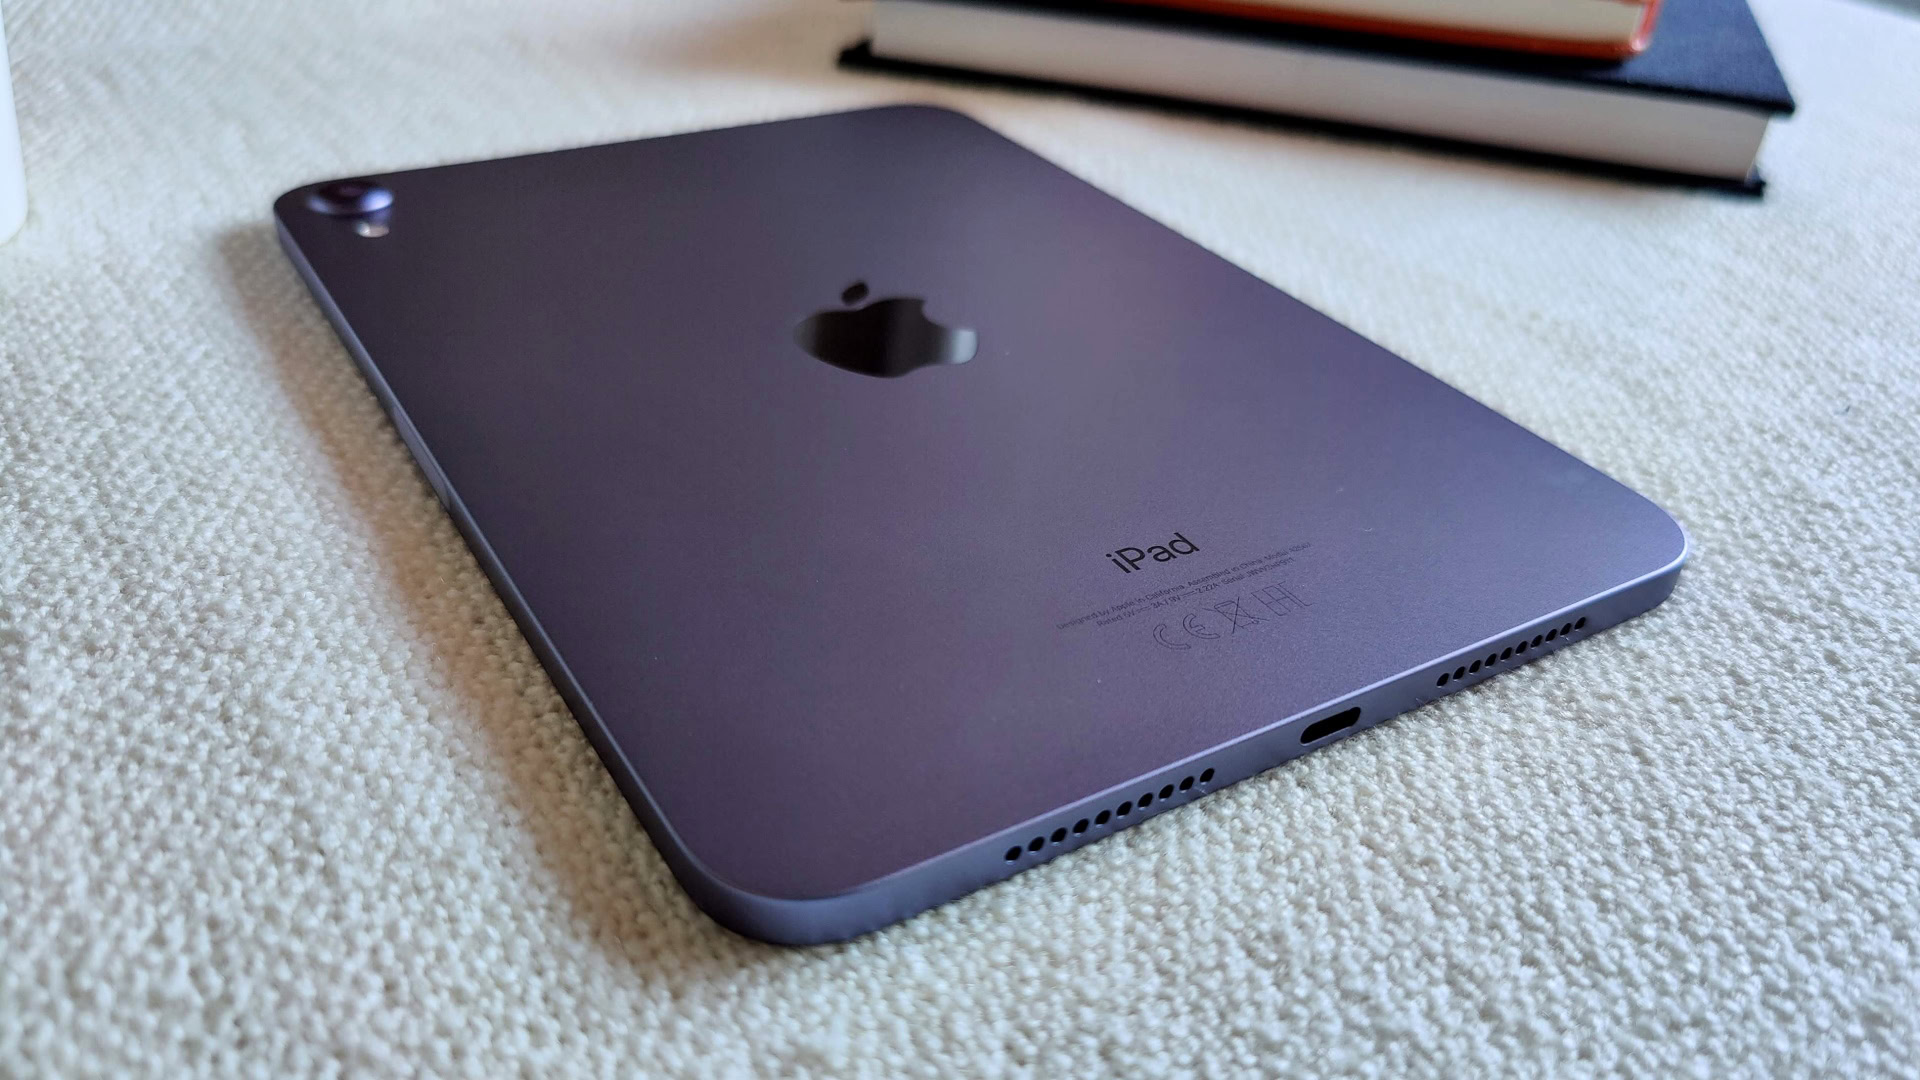 Apple iPad Mini (7th generation) Everything we know and what we want